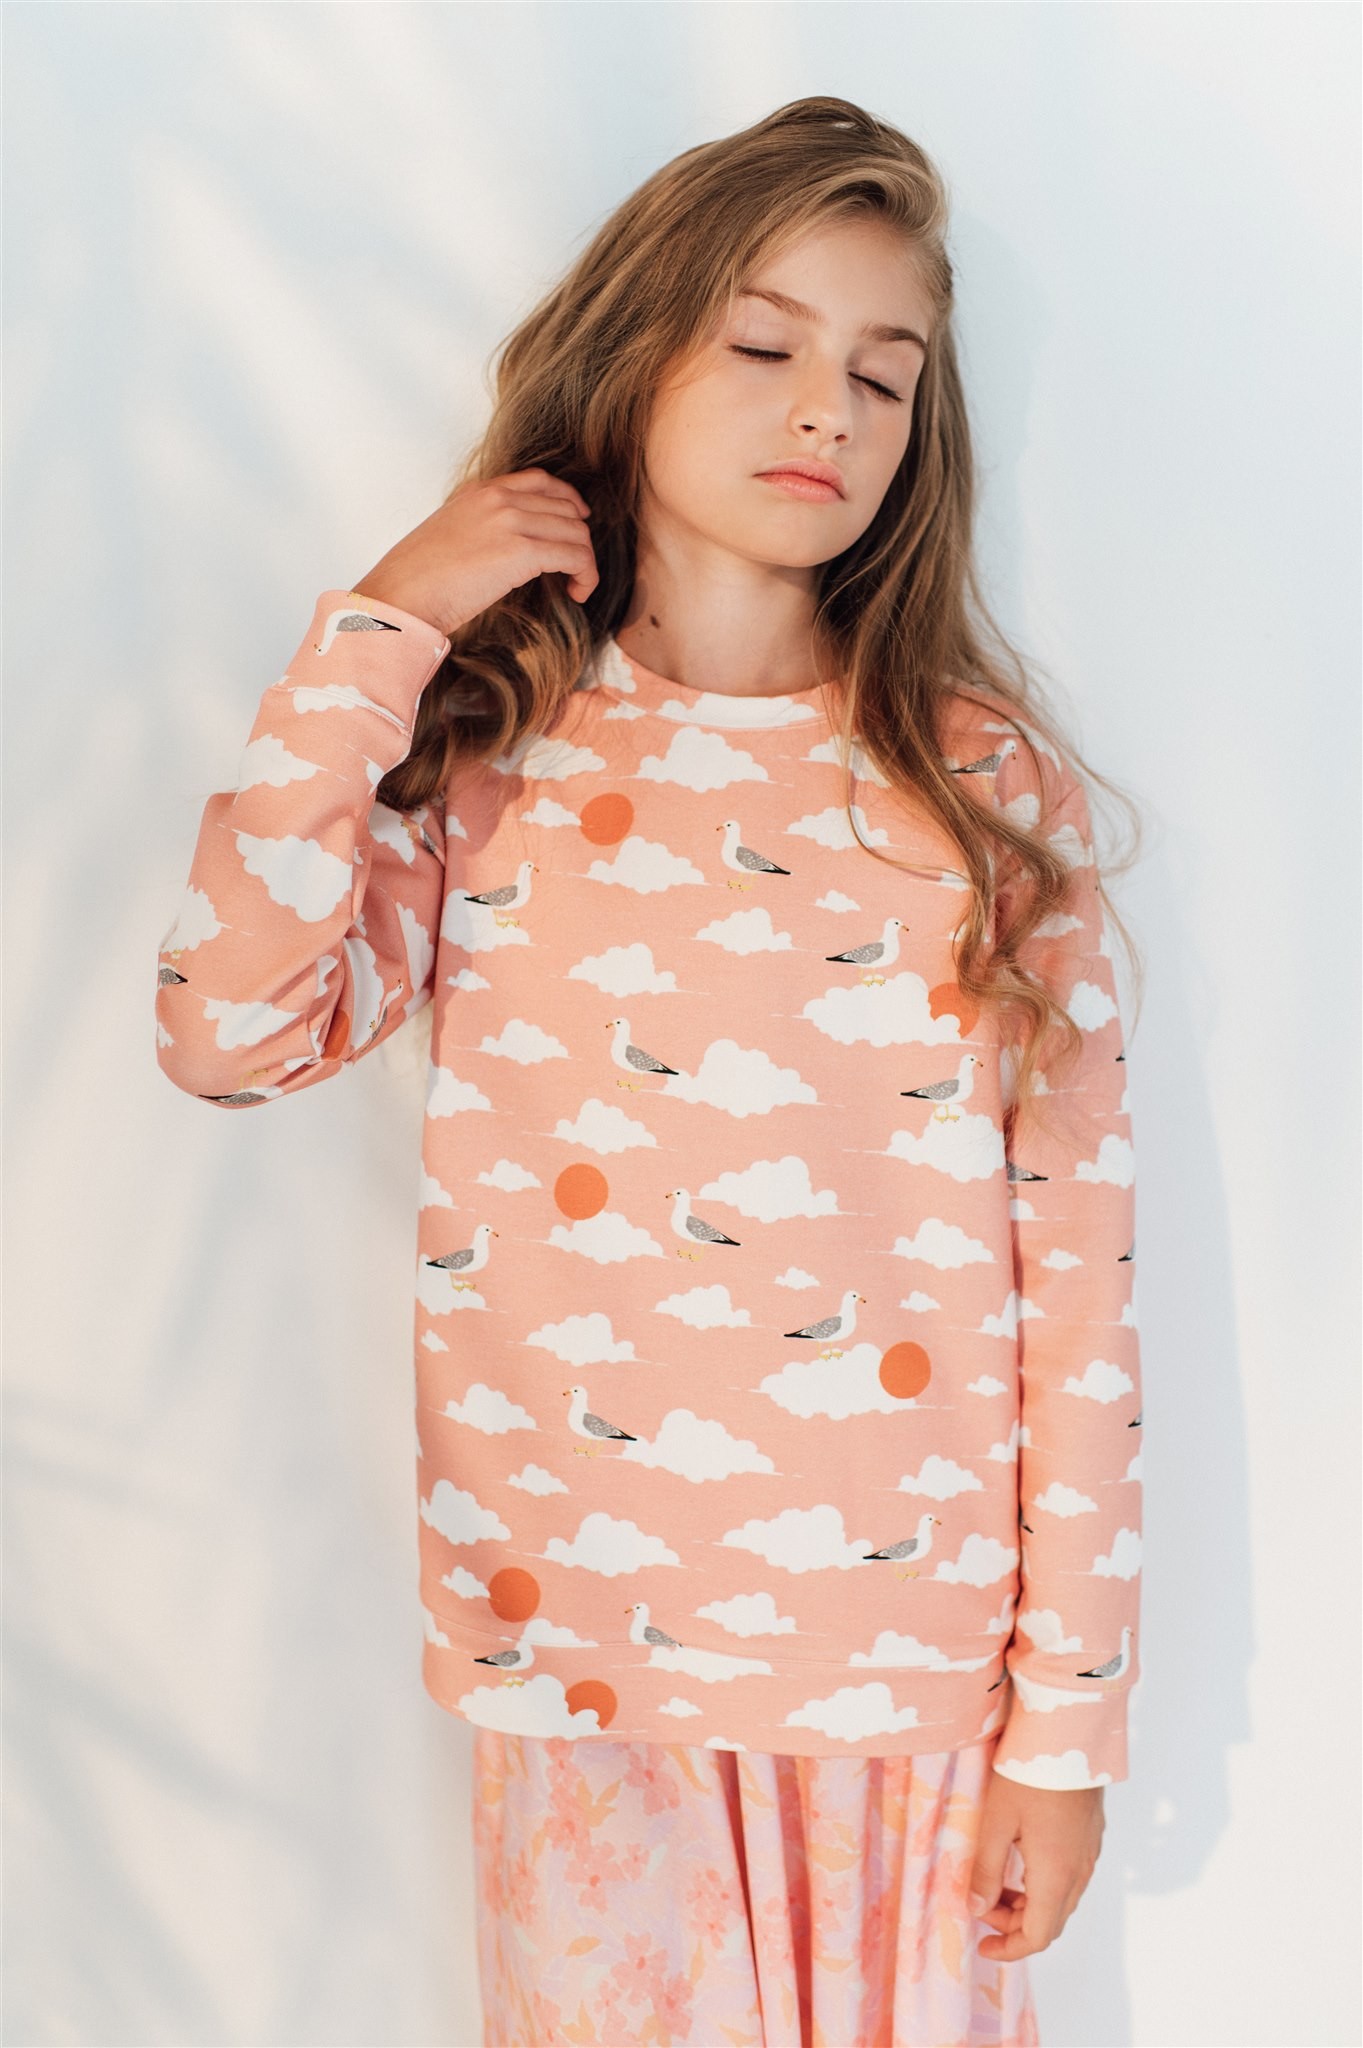 Warm sweater with pink cloud print | HEBE